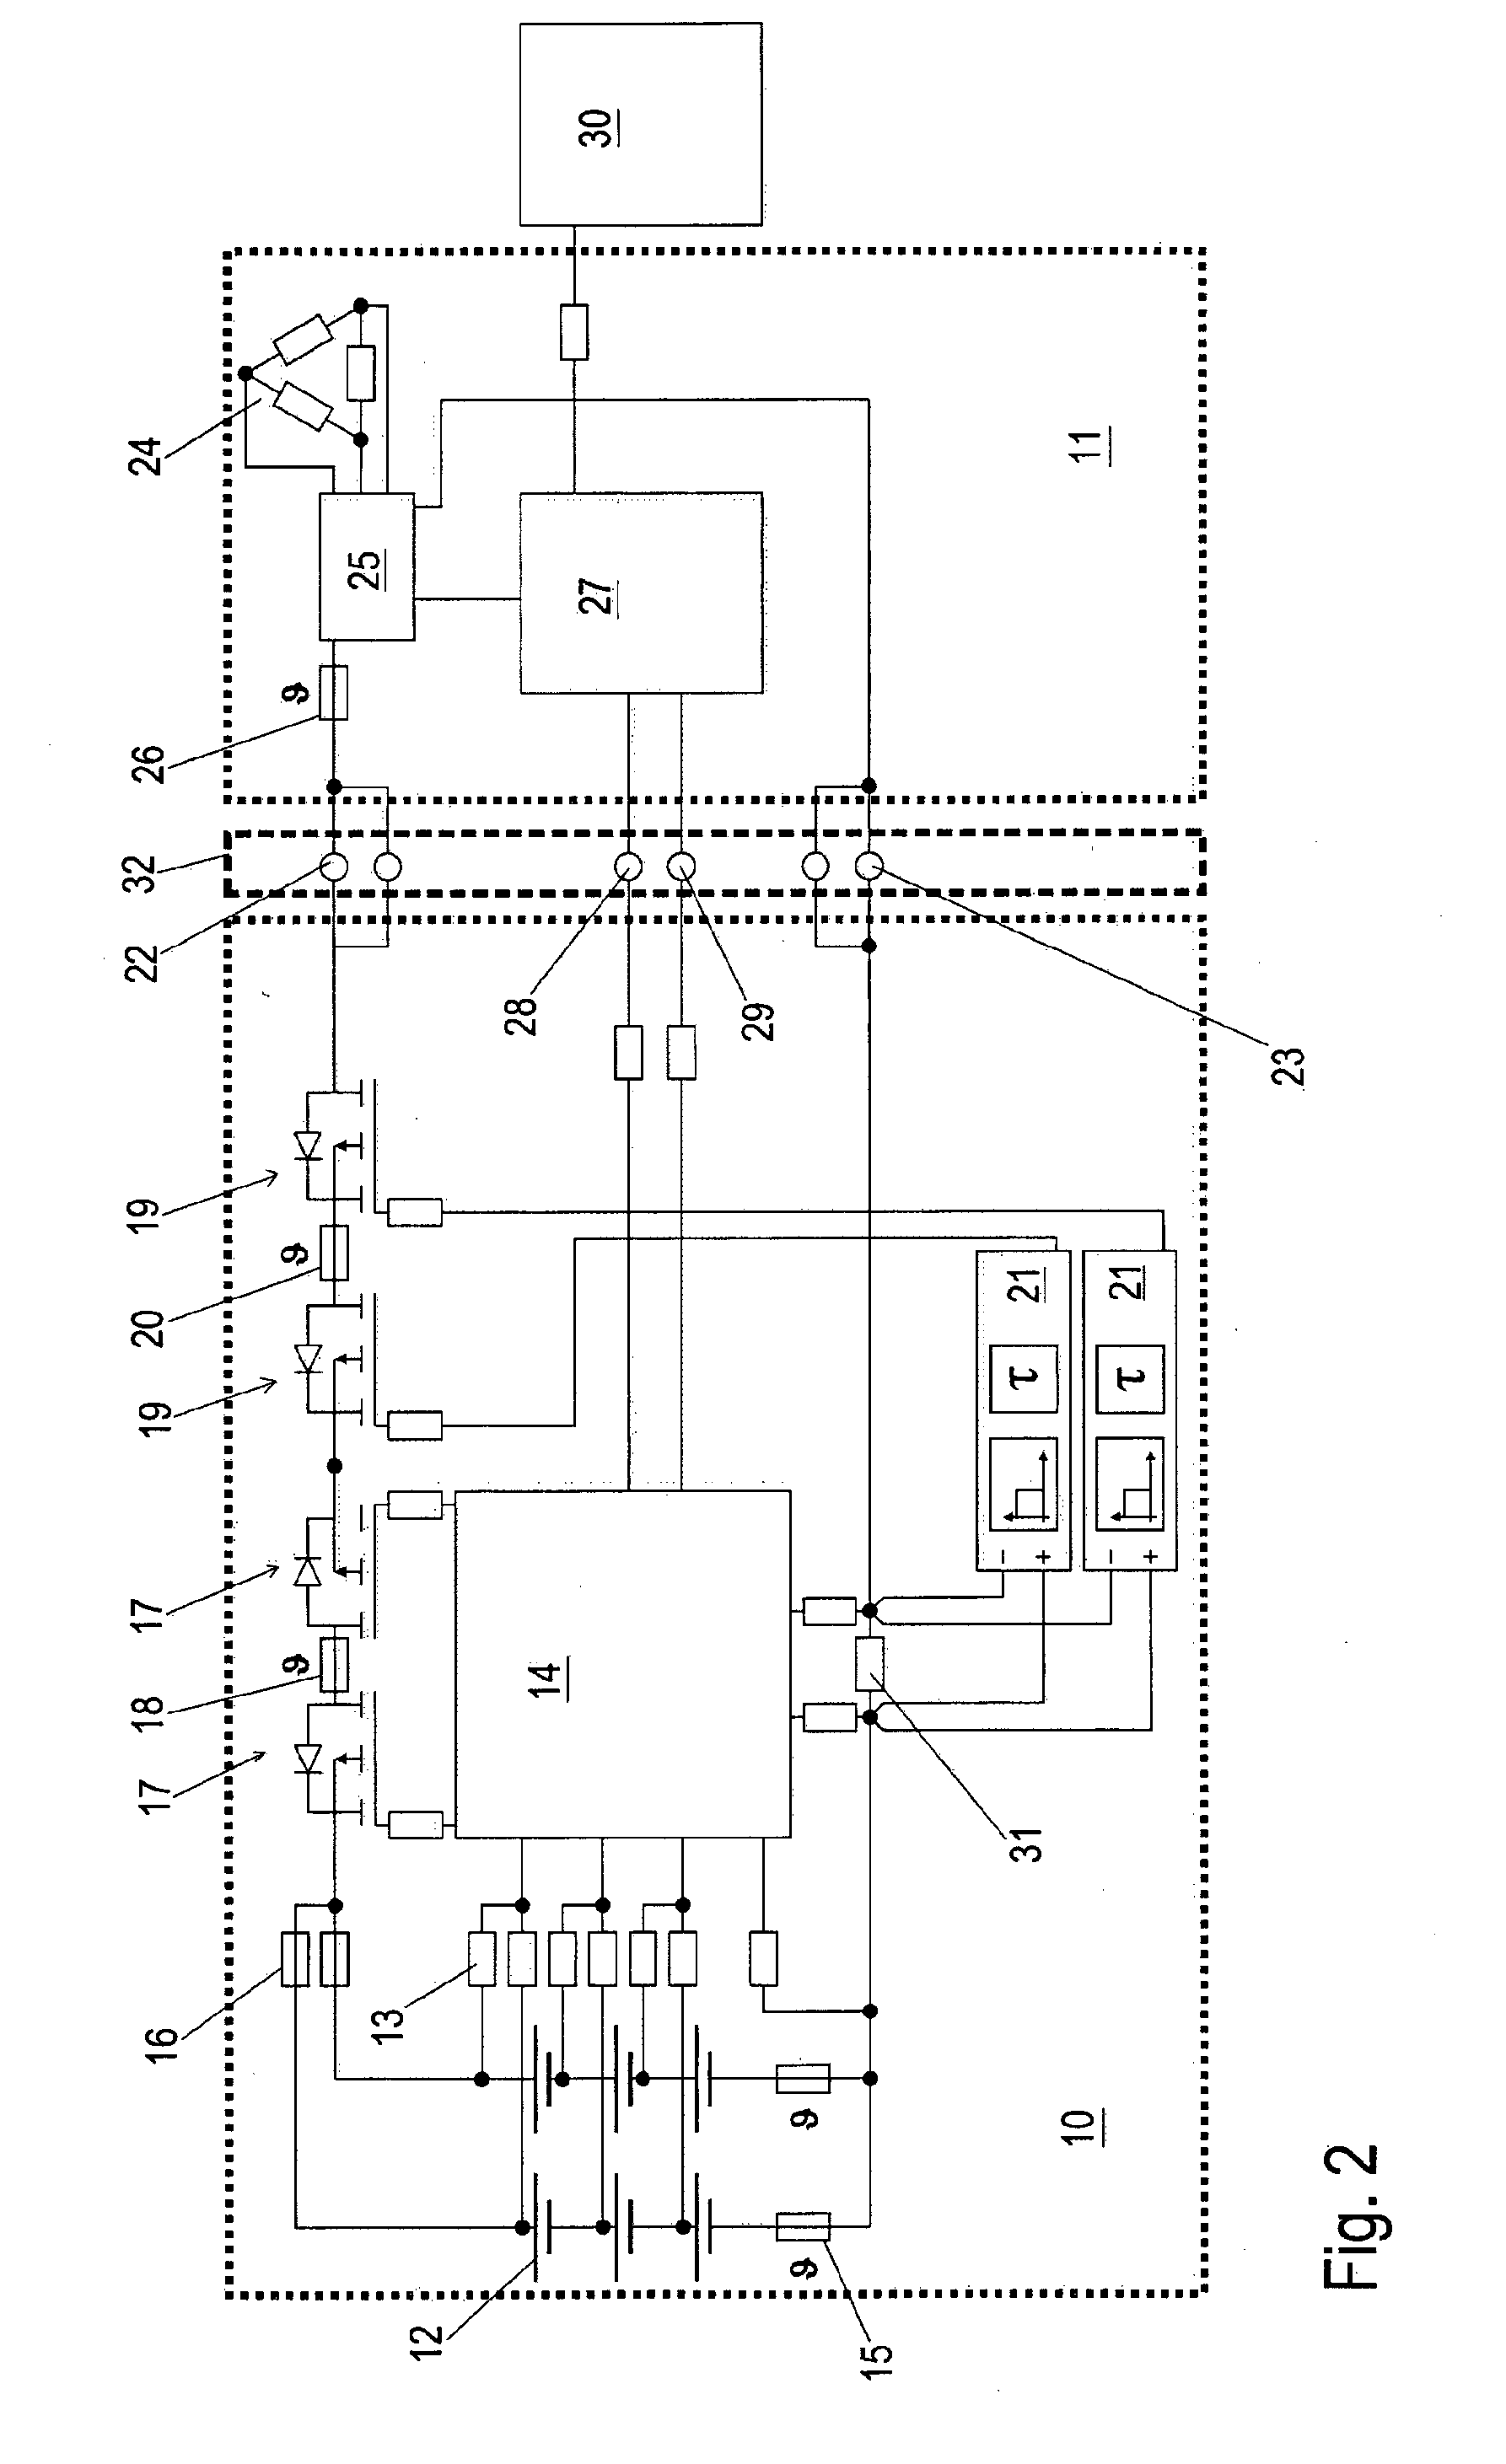 Battery-operated blower filter system for use in potentially explosive areas